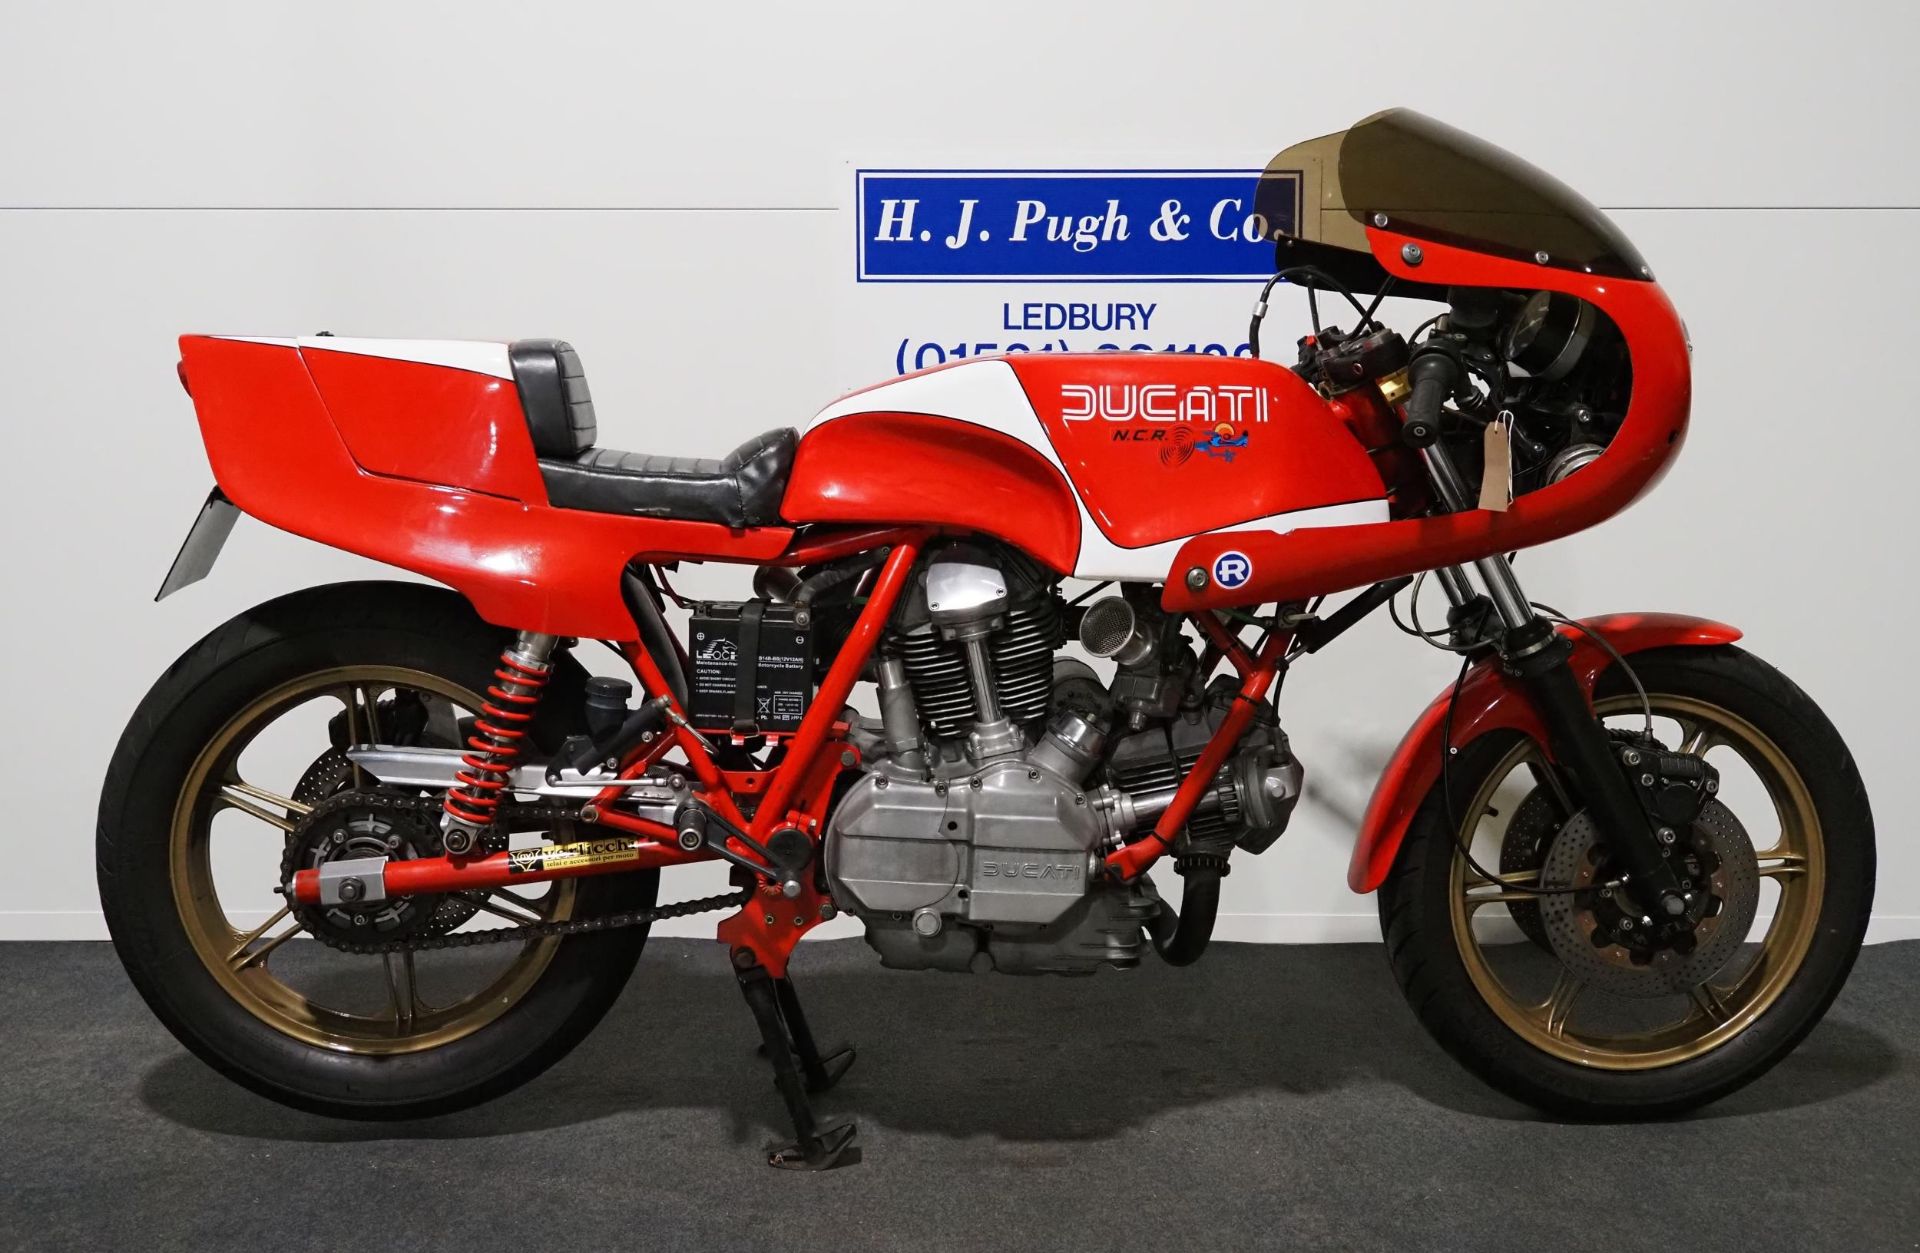 Ducati Darmah motorcycle. 1982. 900cc. Frame No. 952313. Engine No. 906036. Marzocchi forks. 40mm